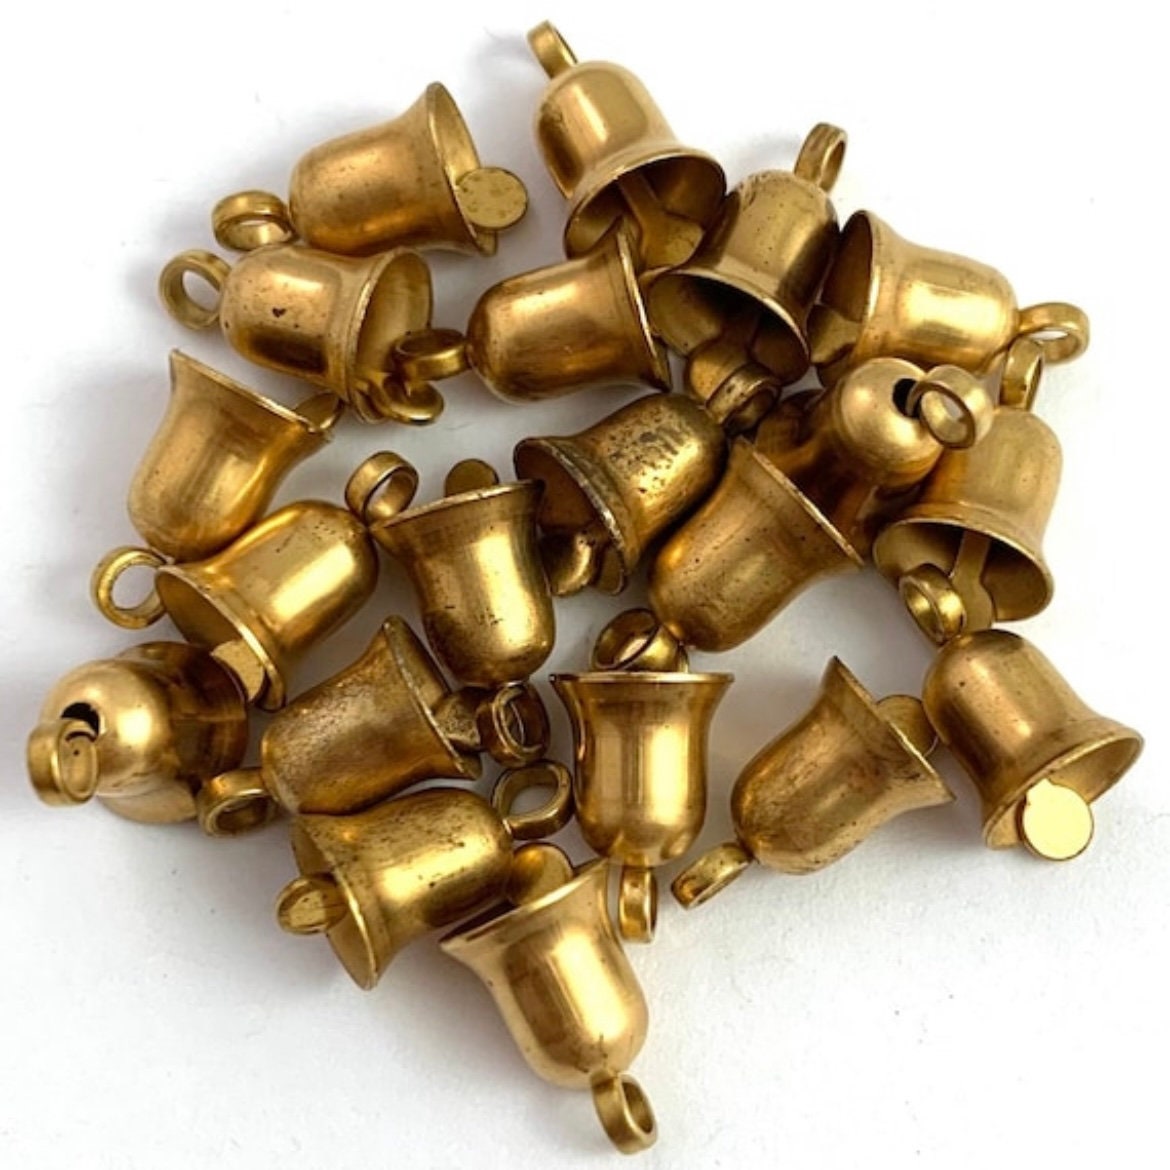  PRETYZOOM 30 Pcs The Bell Small Bells for Crafting Miniture  Decoration Pet Training Bells Dog Bell Cat Necklace Bell Christmas Tree  Bell Pendant Fengshui Bell Iron Bride Brass Hanging Bell 